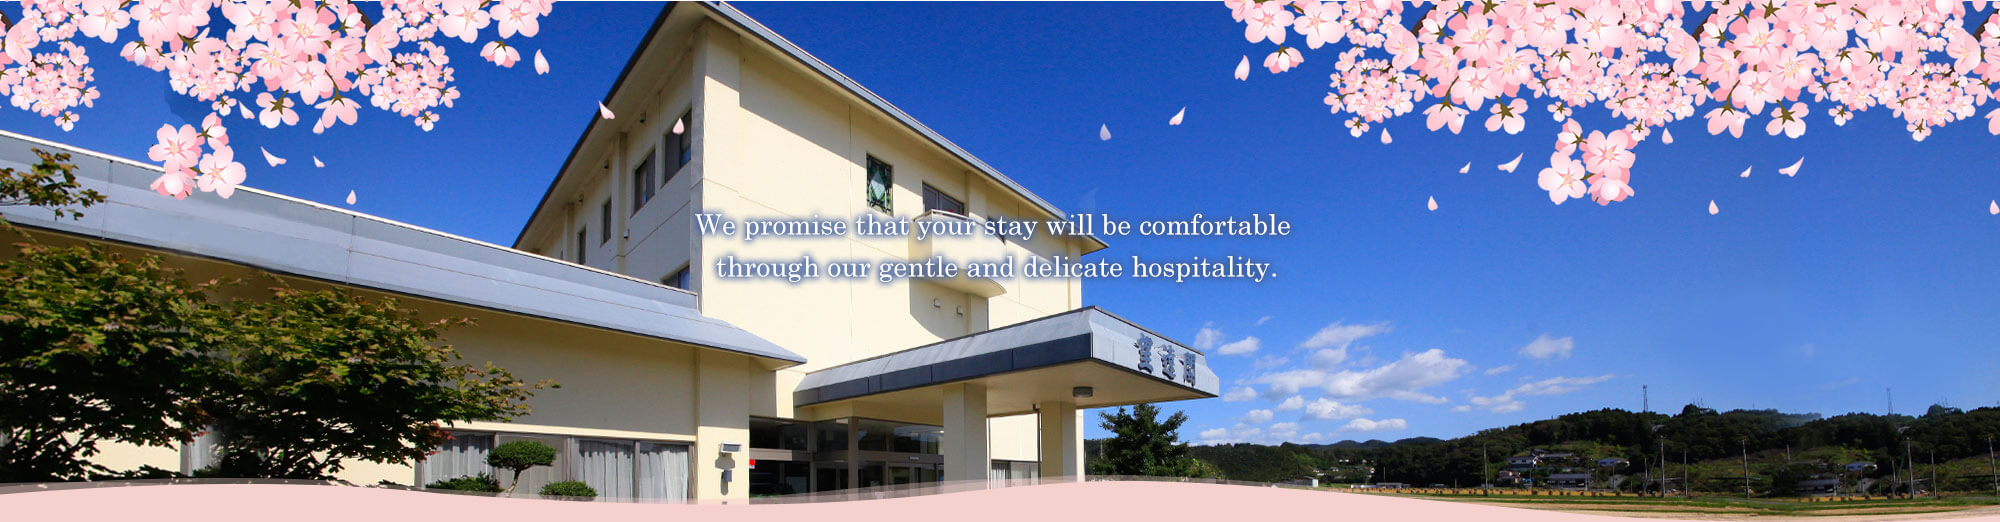 We promise that your stay will be comfortable through our gentle and delicate hospitality.